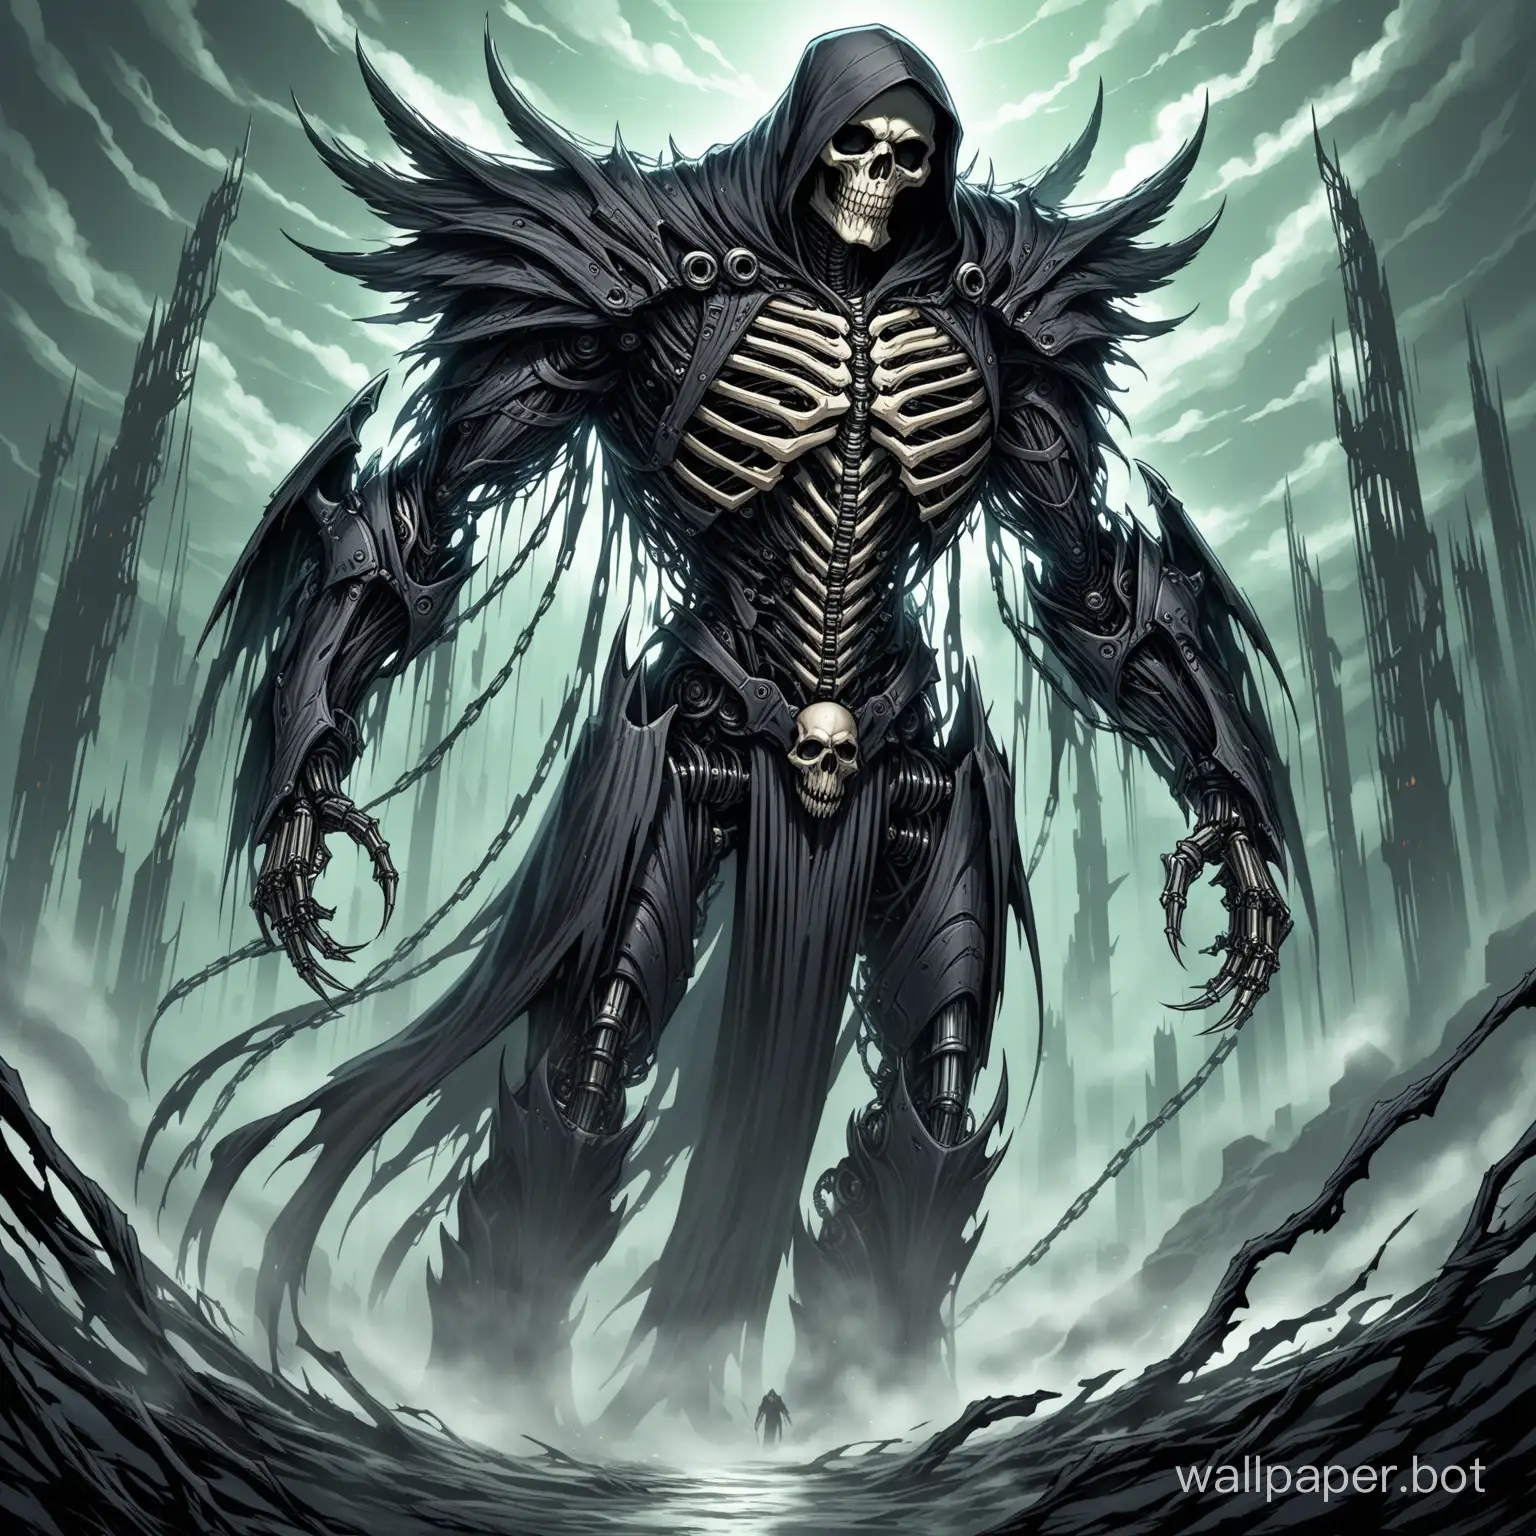 Create a human-like, Bio-mechanical Giant inspired by the grim reaper, angel of death, and heavy metal.